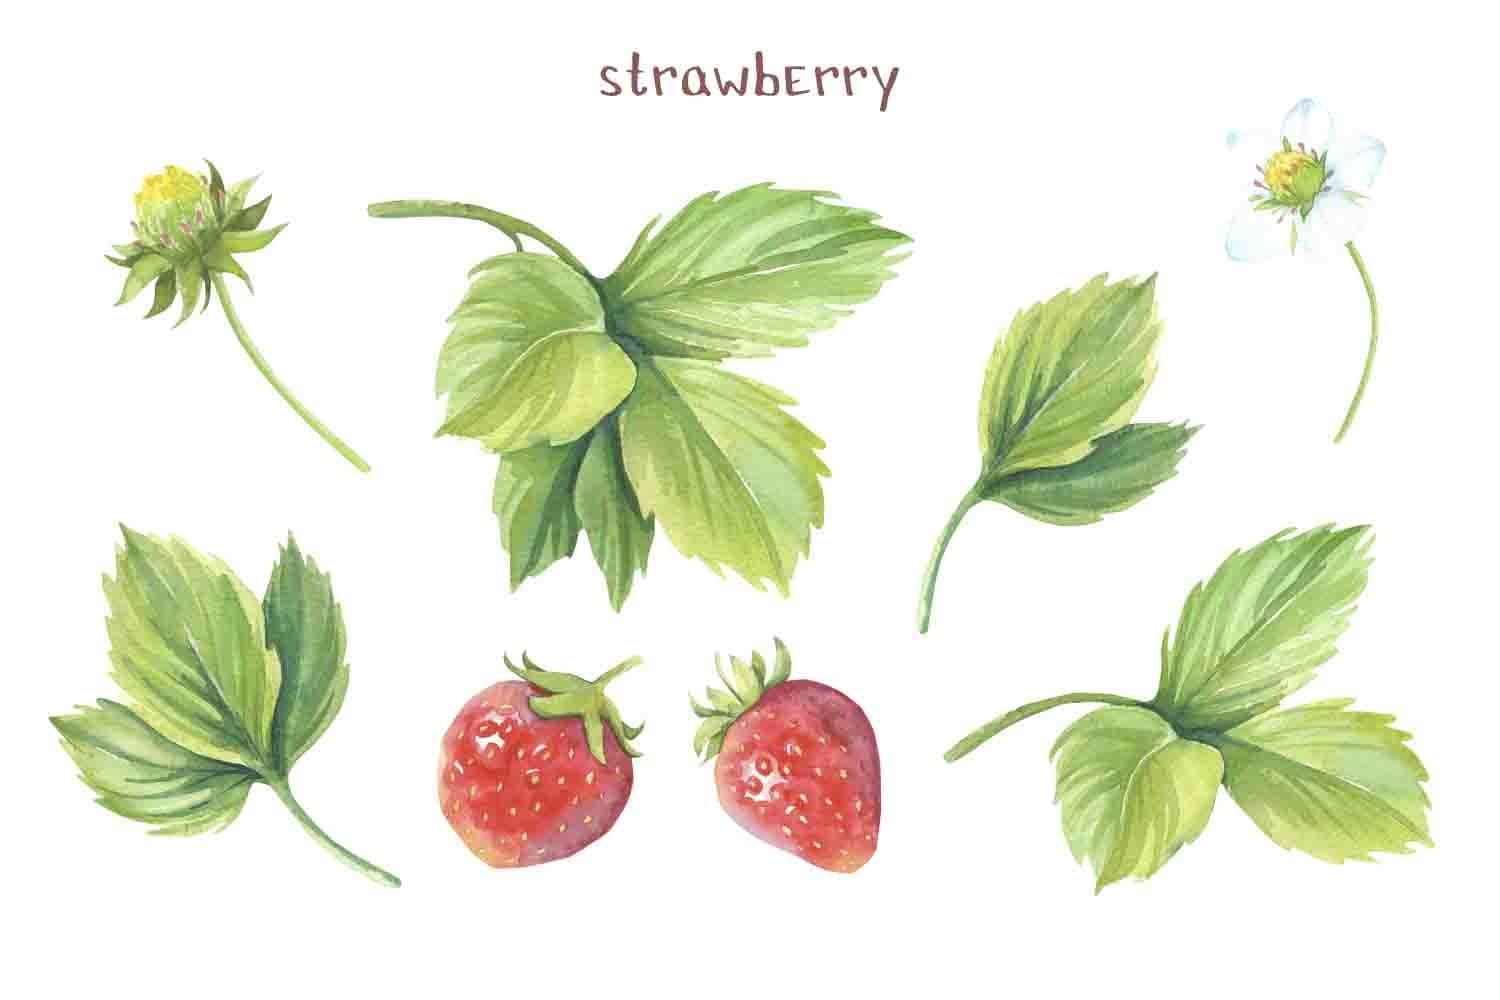 Separate elements of strawberries are drawn on a white background.